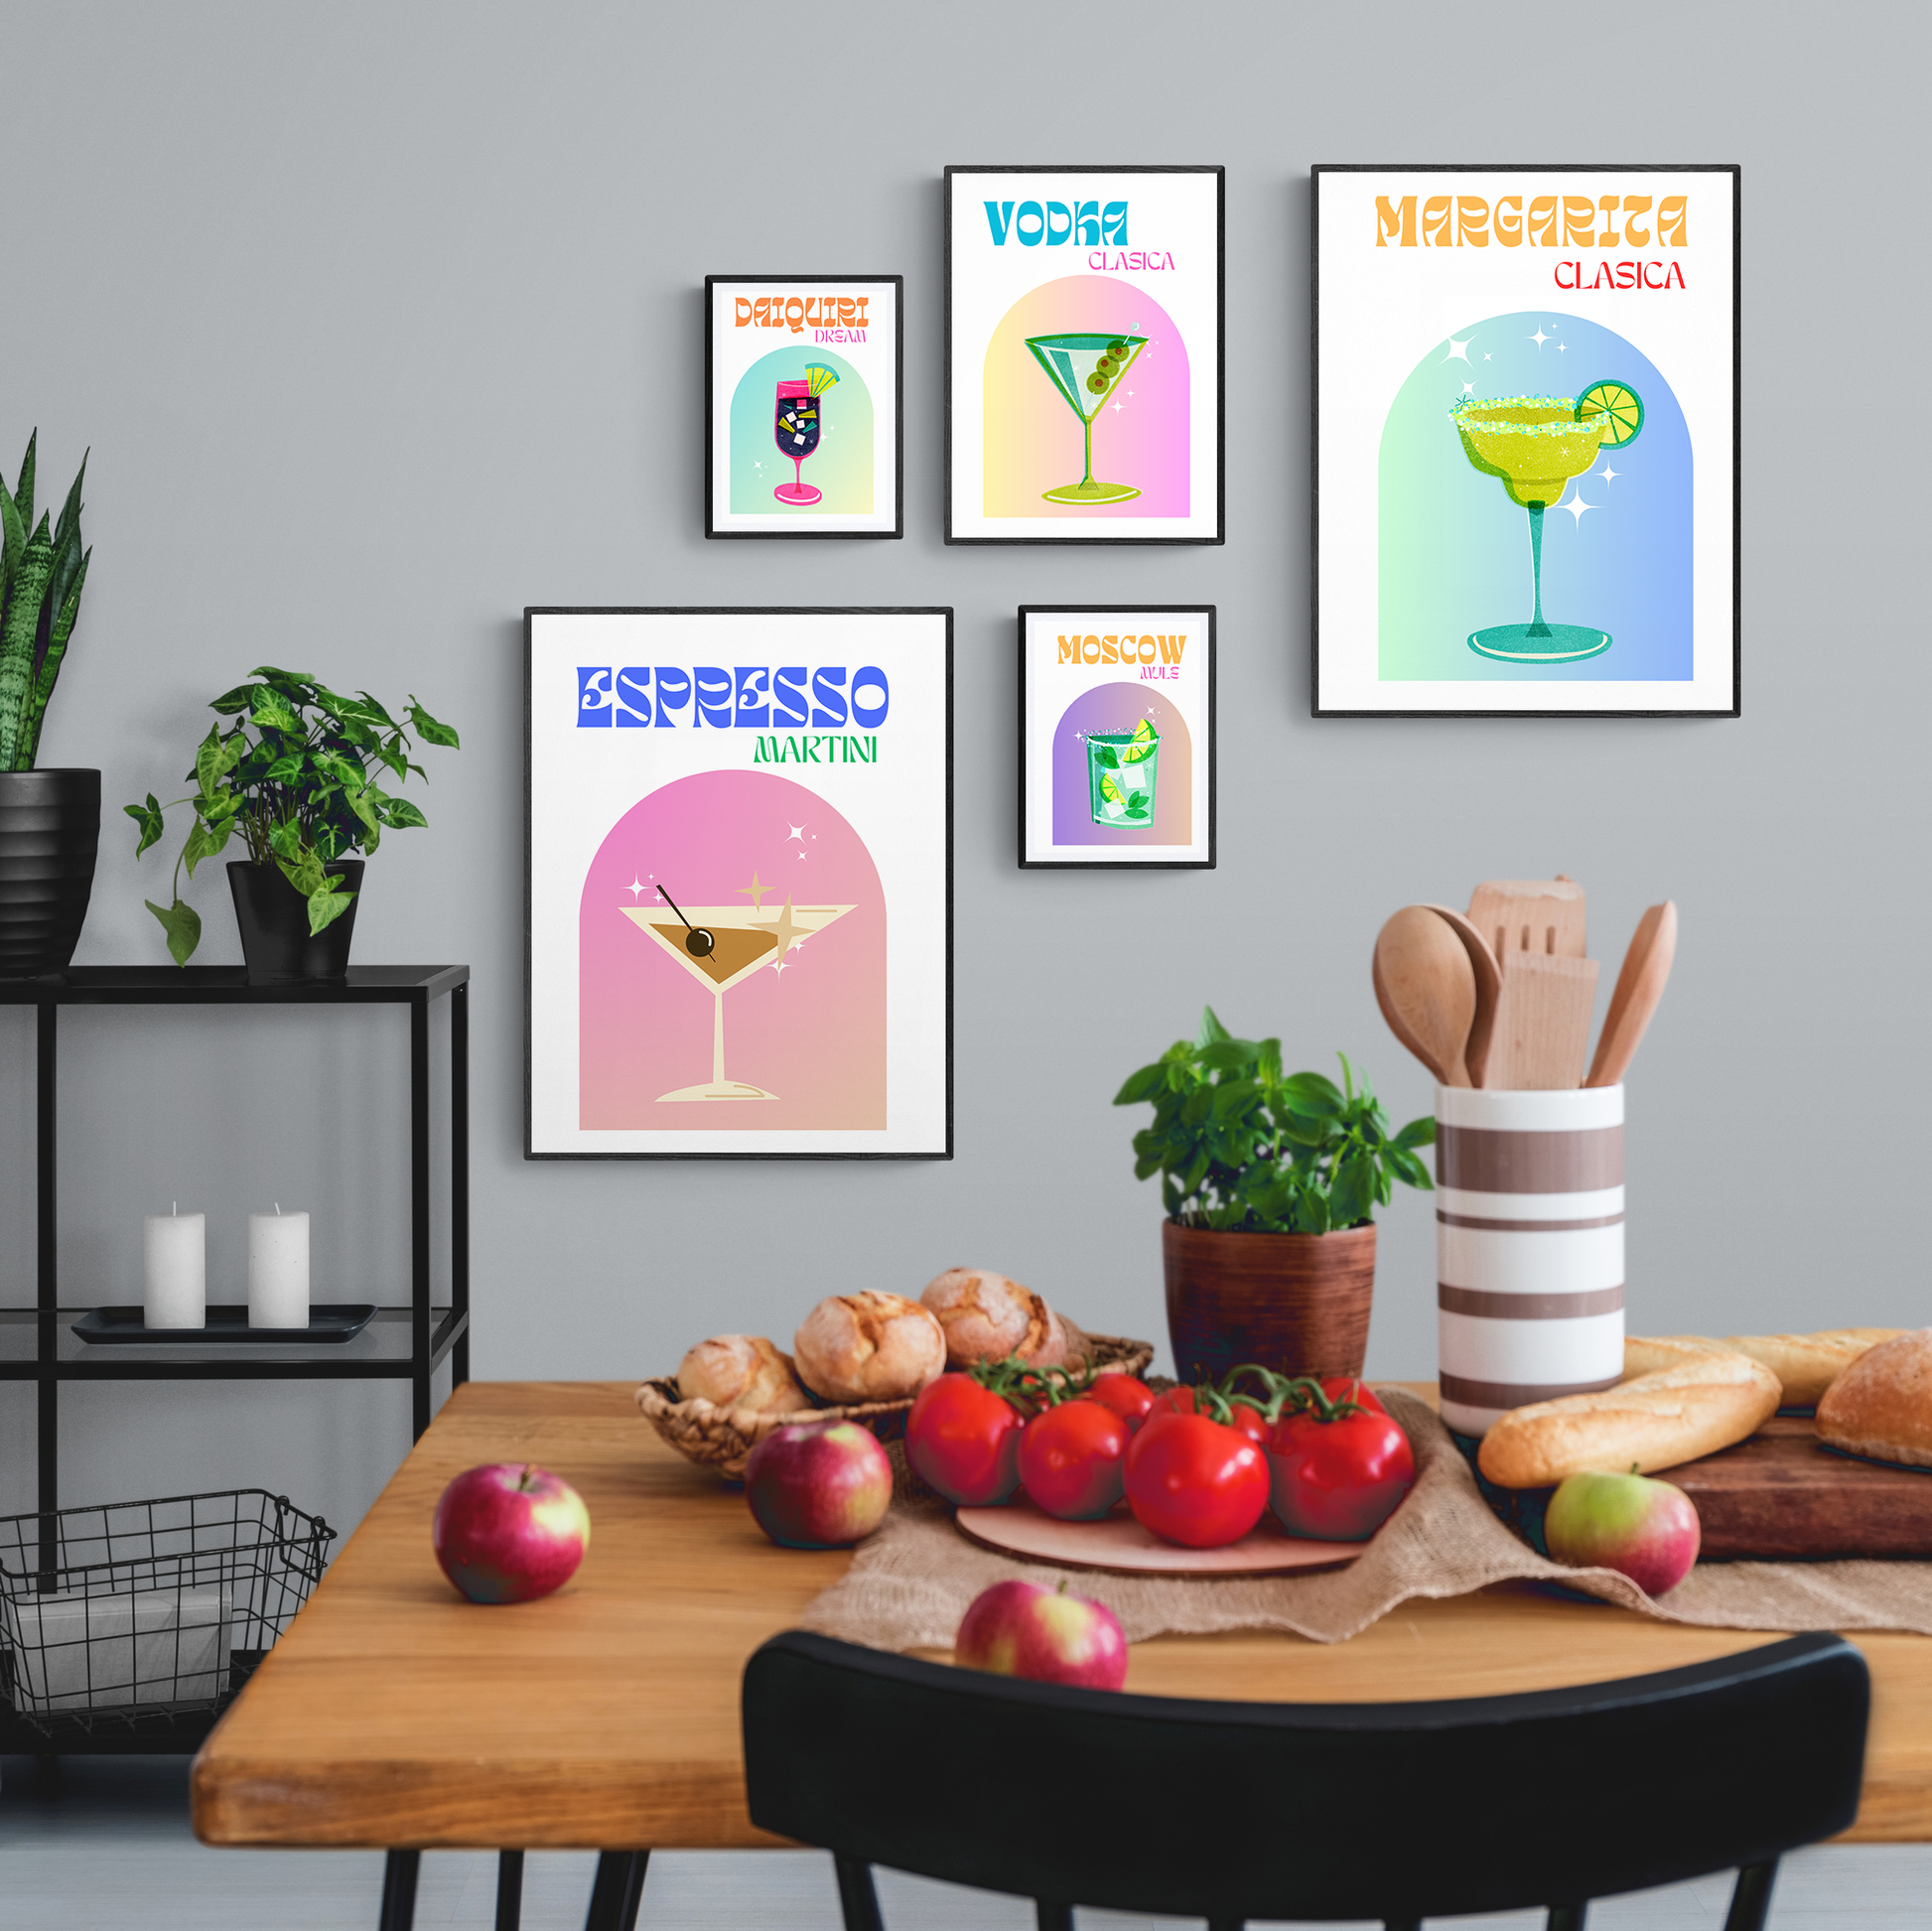 Mulled Wine Print features a classic recipe from one of our most popular poster subjects, with a splash of Campari from the poster itself. Transform any nursery, kitchen, or living room wall into a colorful work of art with this cocktail-inspired wall art, curated from renowned artists and popular prints. Make discovering a favorite cocktail a gift with this art poster, and find even more inspired art prints and posters for all of your wall art needs.